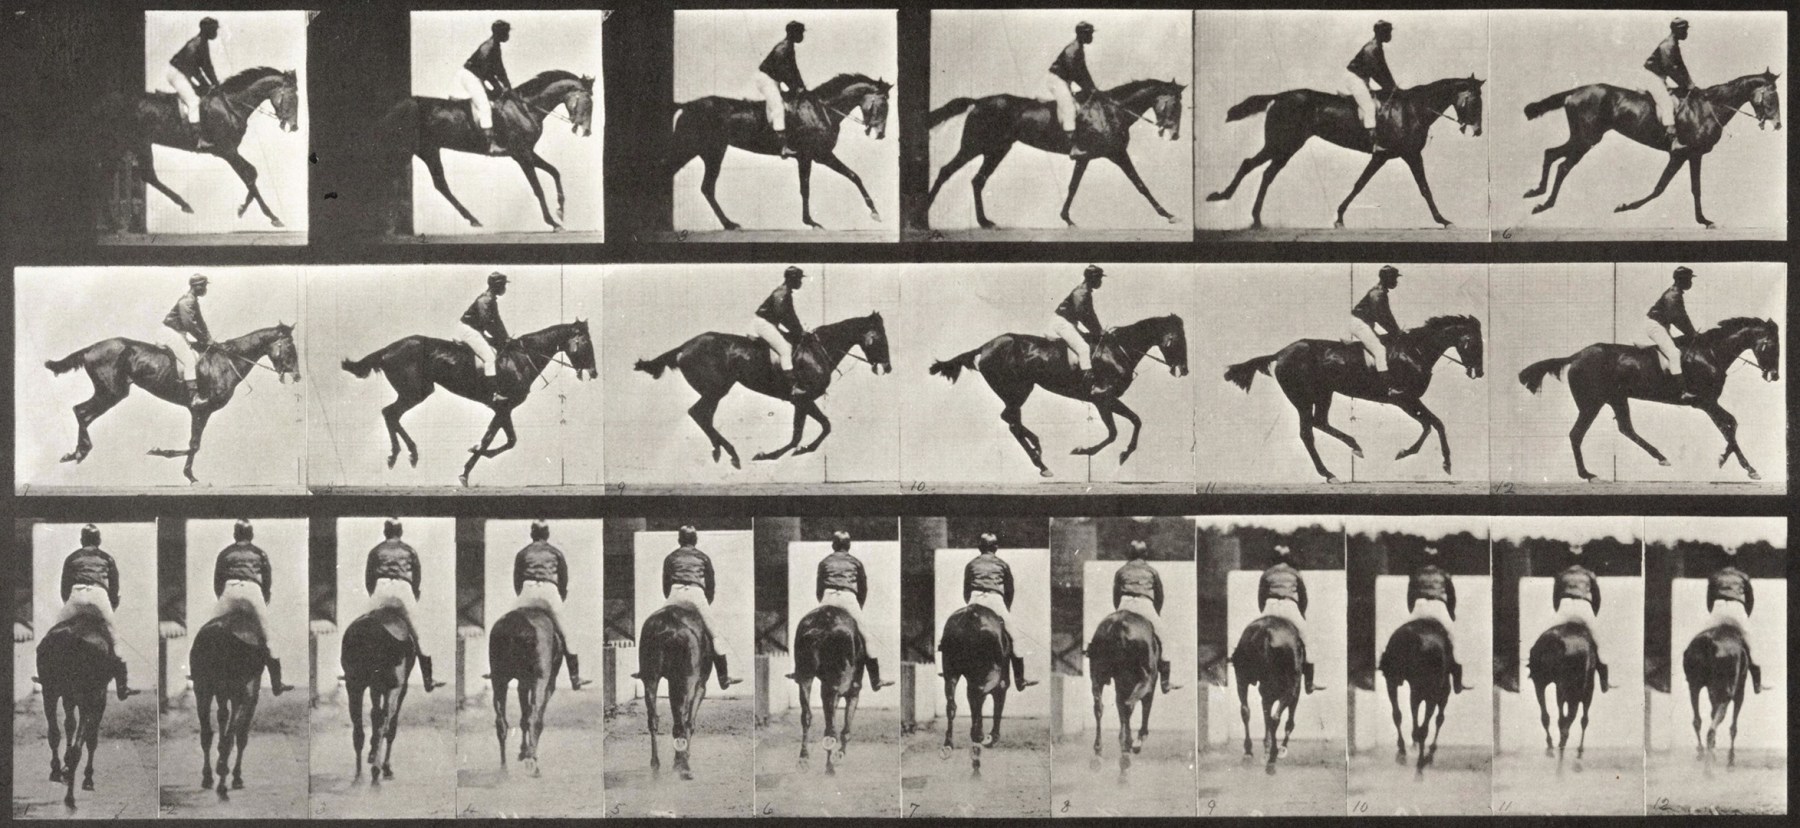 Sequence of black and white photos showing the movements of a man riding a horse